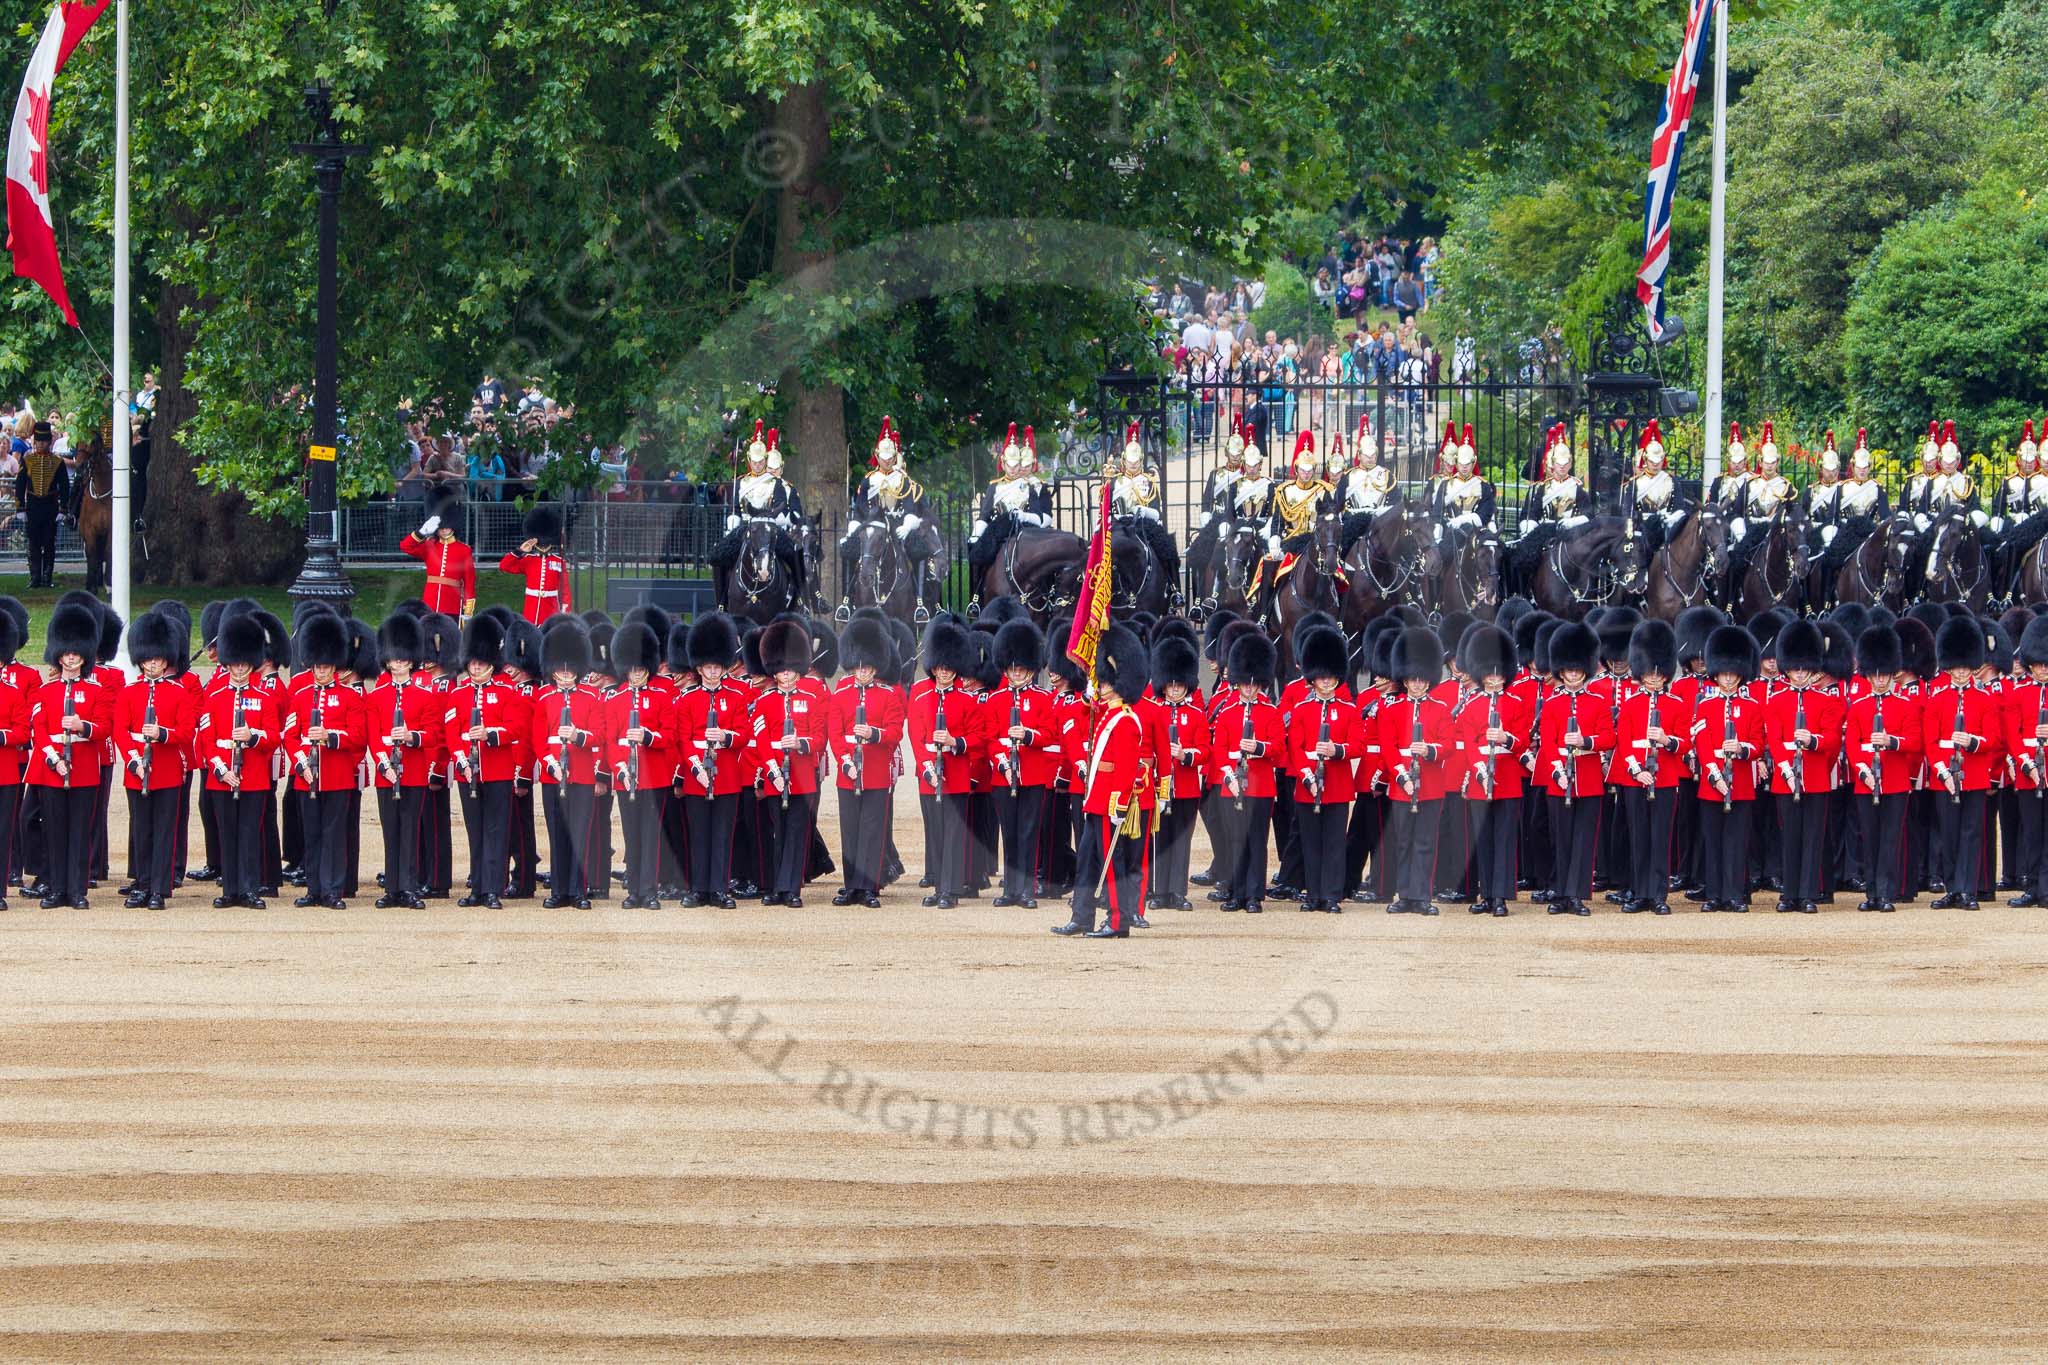 Trooping the Colour 2014.
Horse Guards Parade, Westminster,
London SW1A,

United Kingdom,
on 14 June 2014 at 11:28, image #573